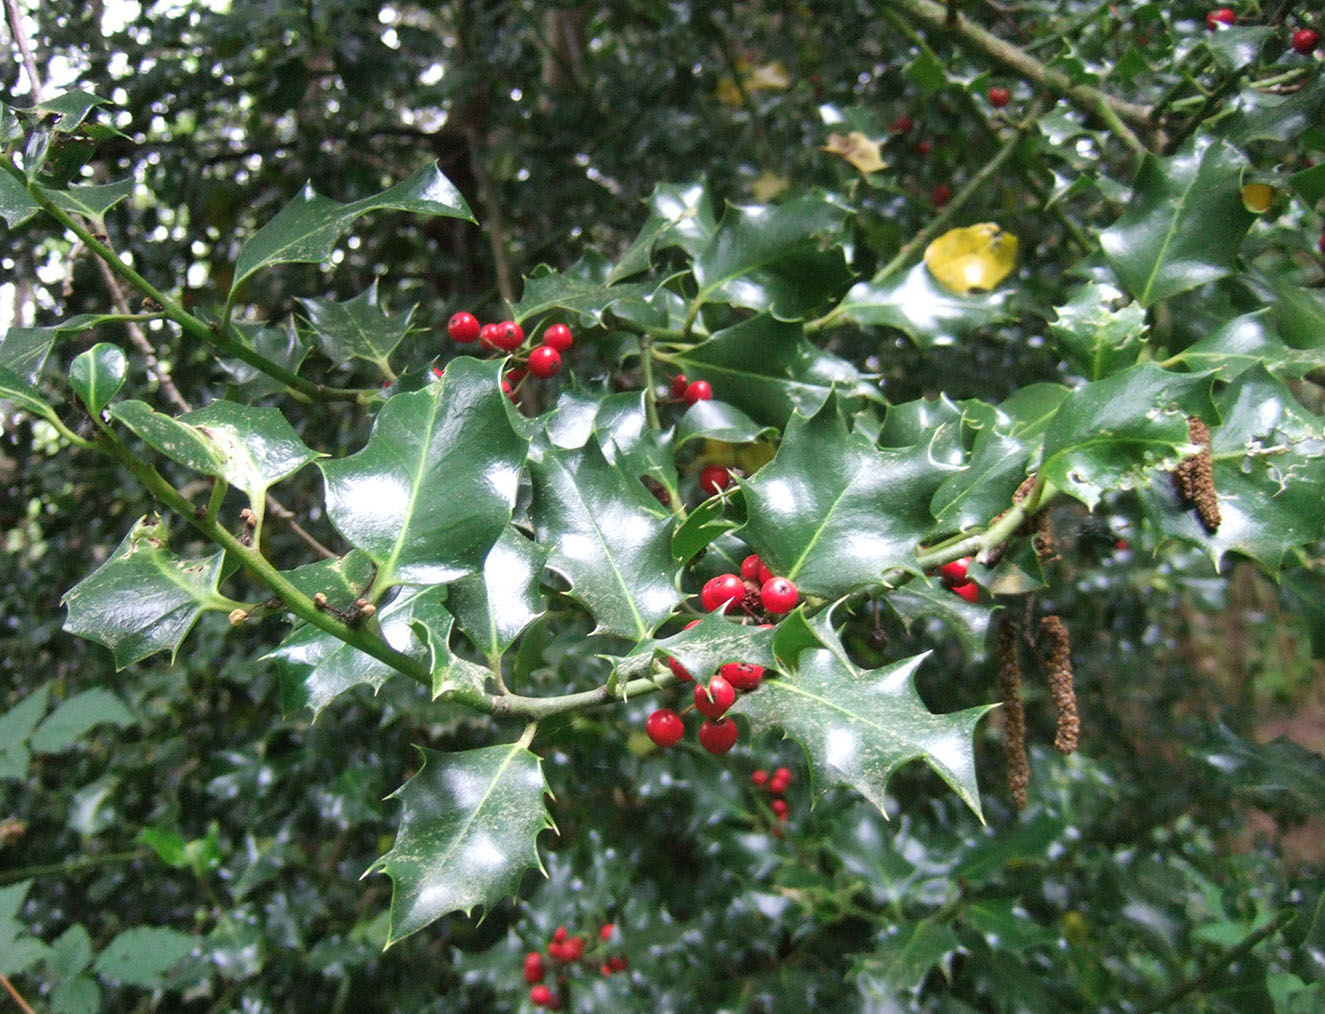 English holly leaves with berries